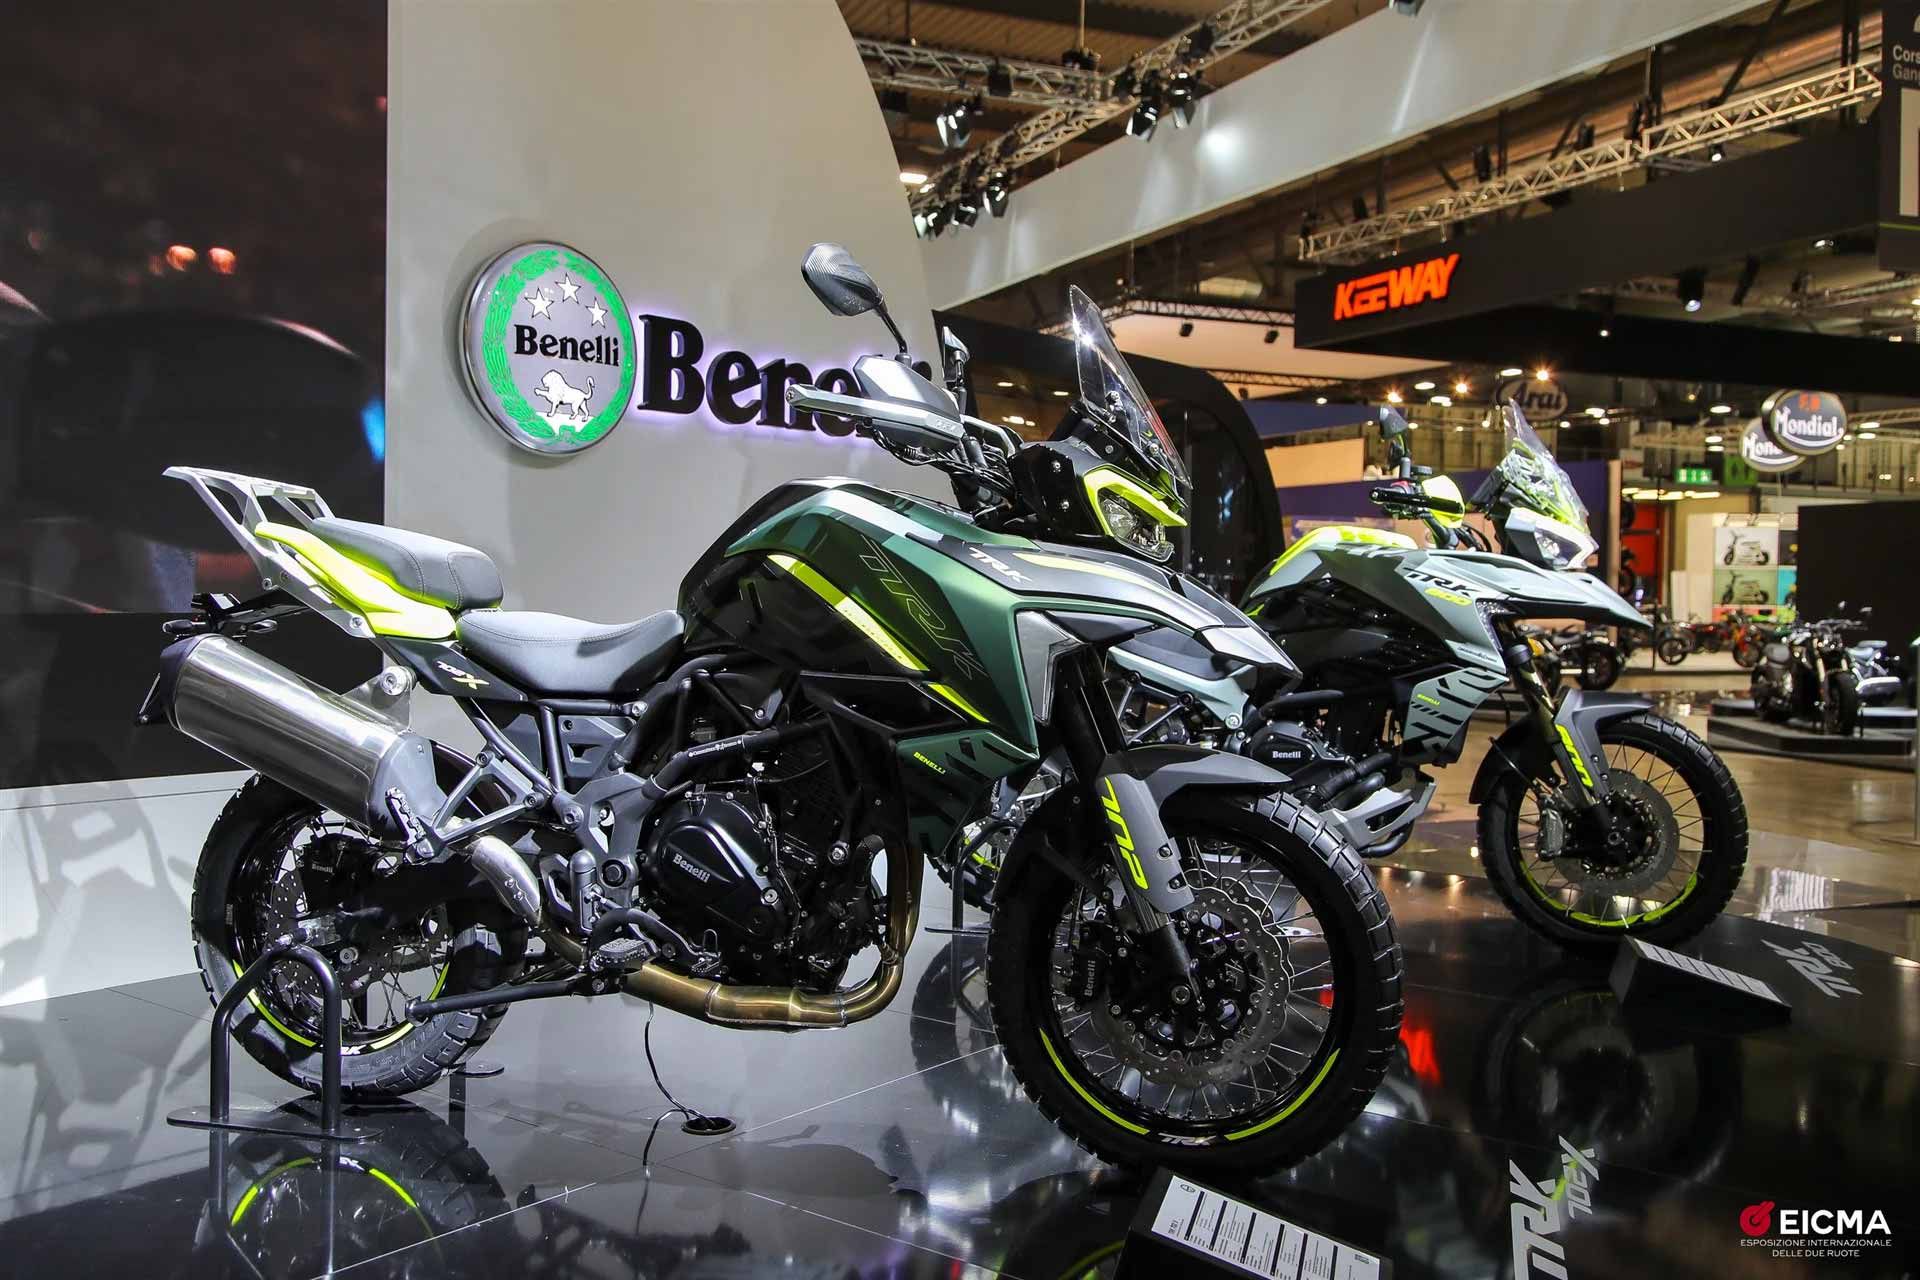 The Benelli TRK 702X, one of three models unveiled at EICMA 2022.